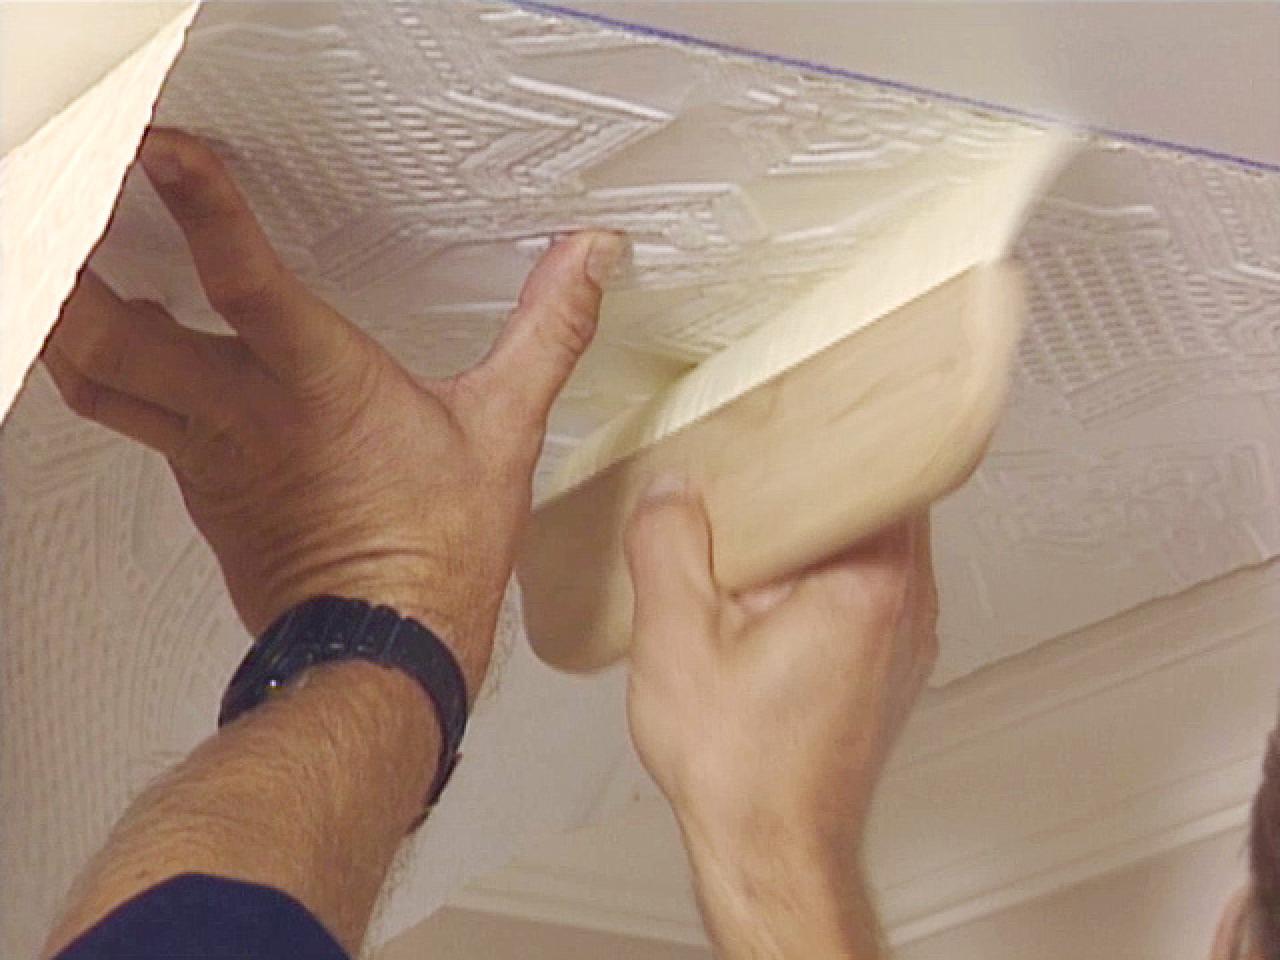 Go Over Paper With Wallpaper Smoothing Brush - Over Ceiling Tiles - HD Wallpaper 